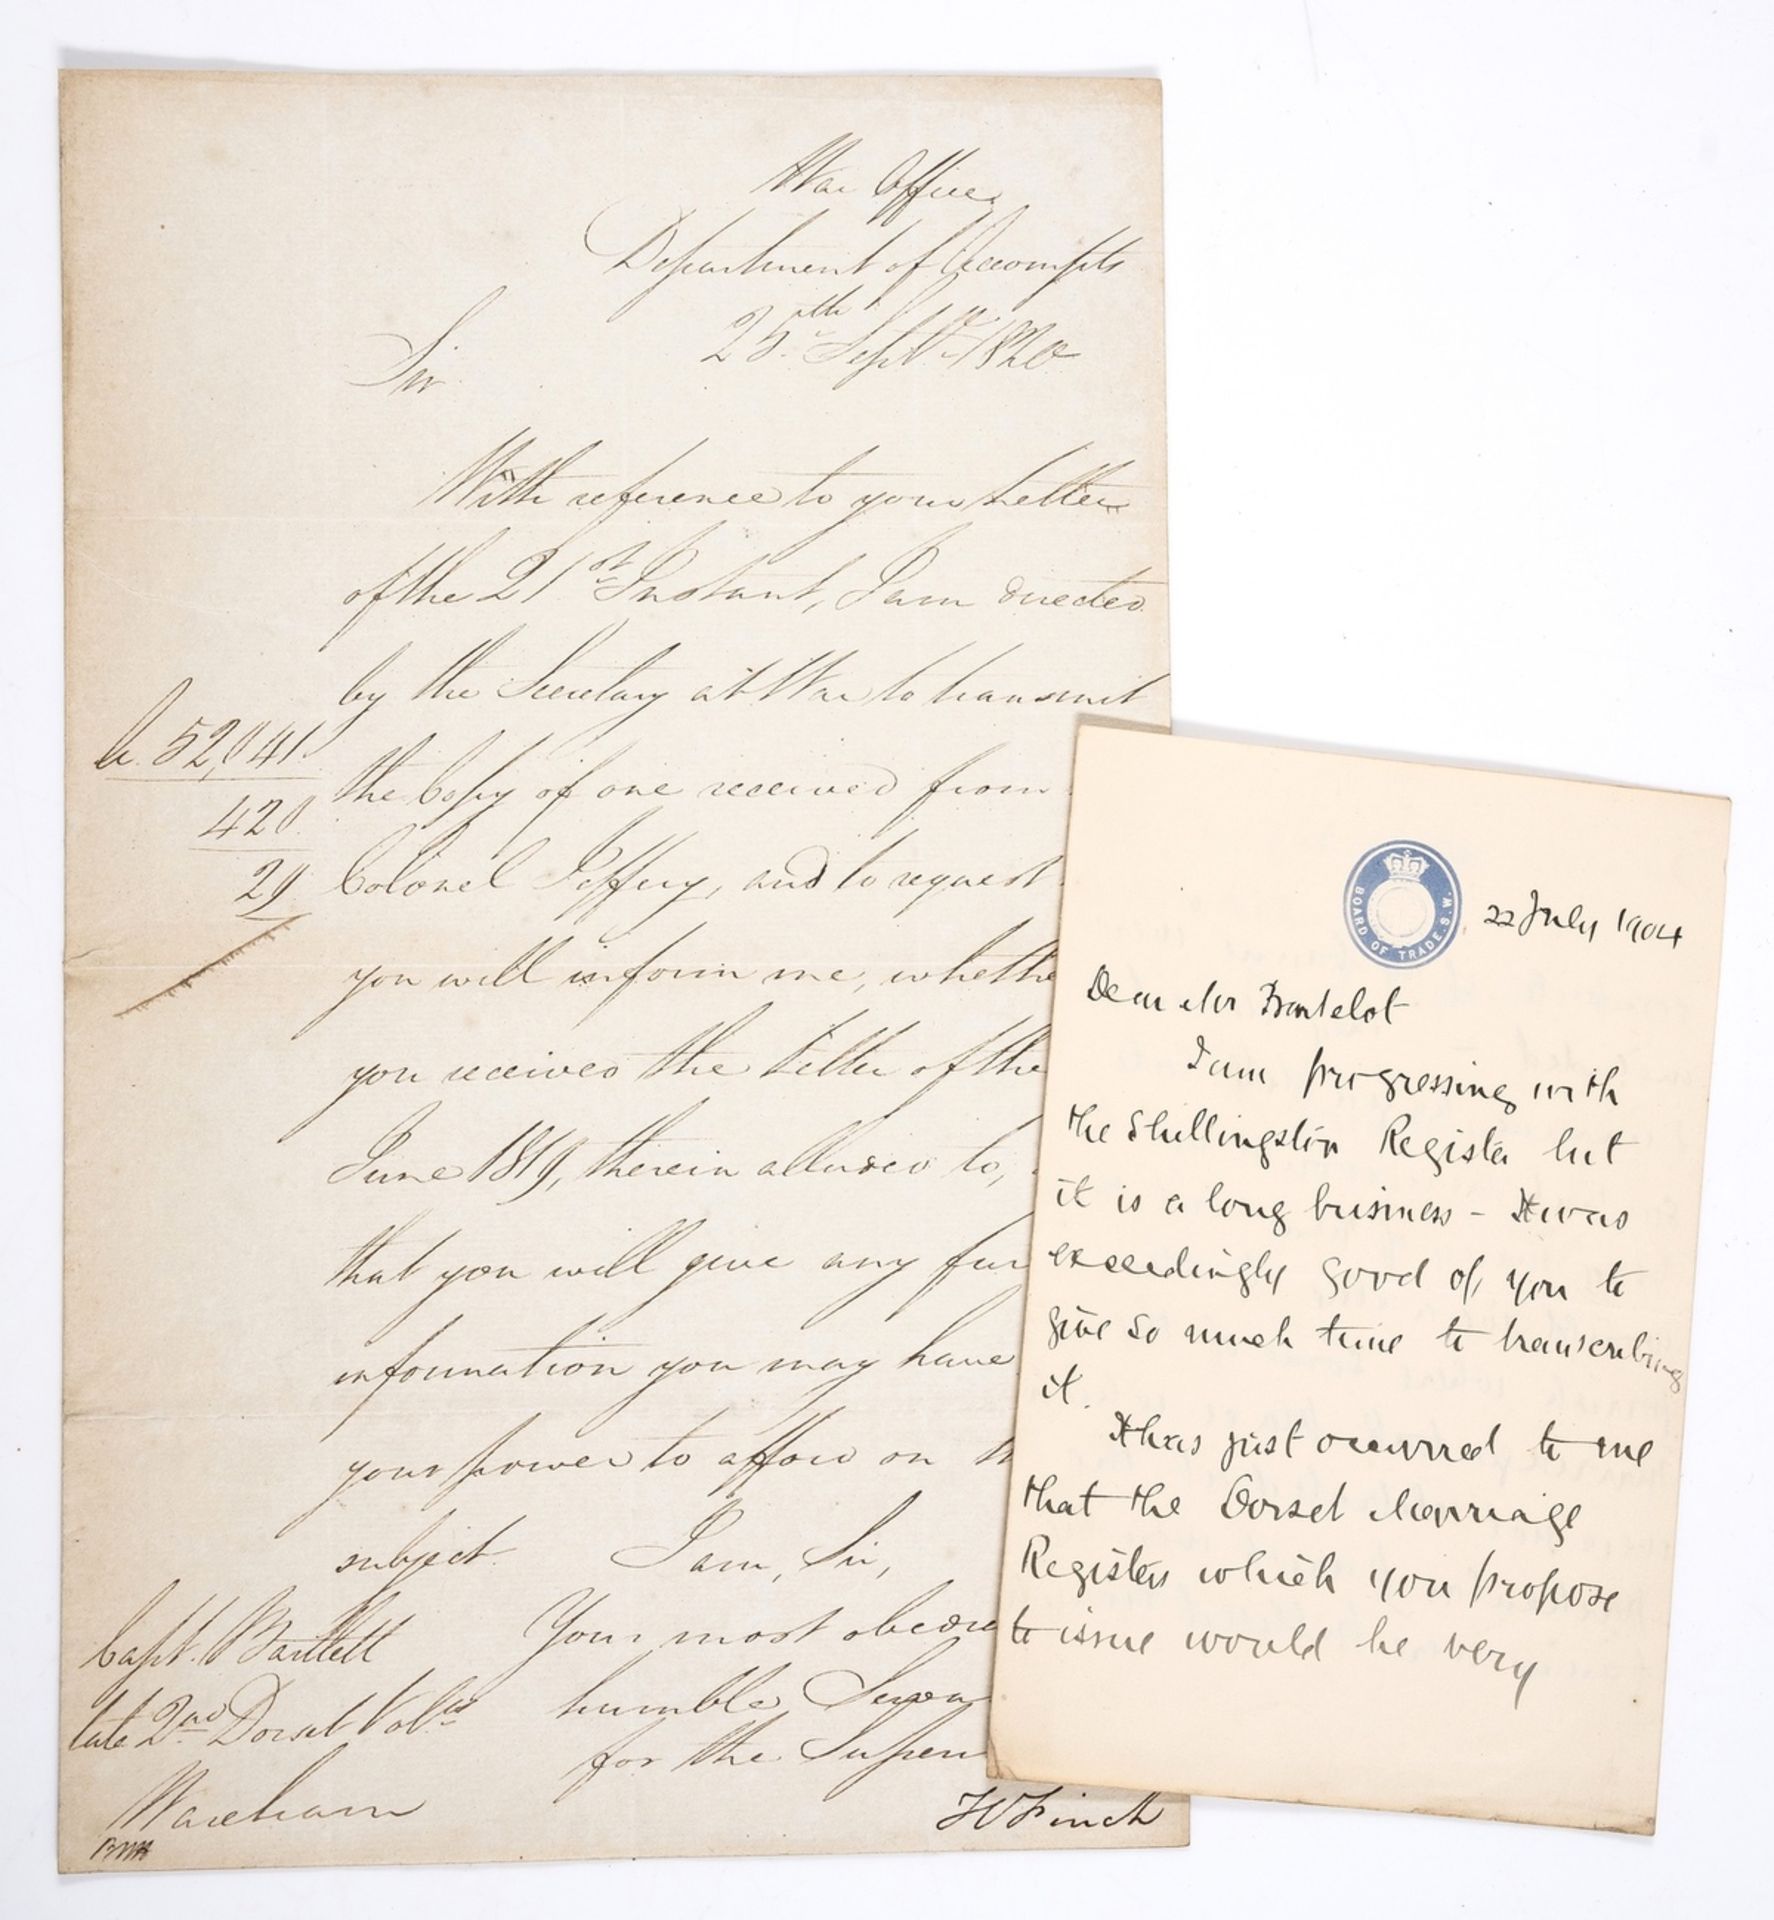 Dorset.- George III (King) Letter signed "George R" to his son Frederick Duke of York, 1804, "I …